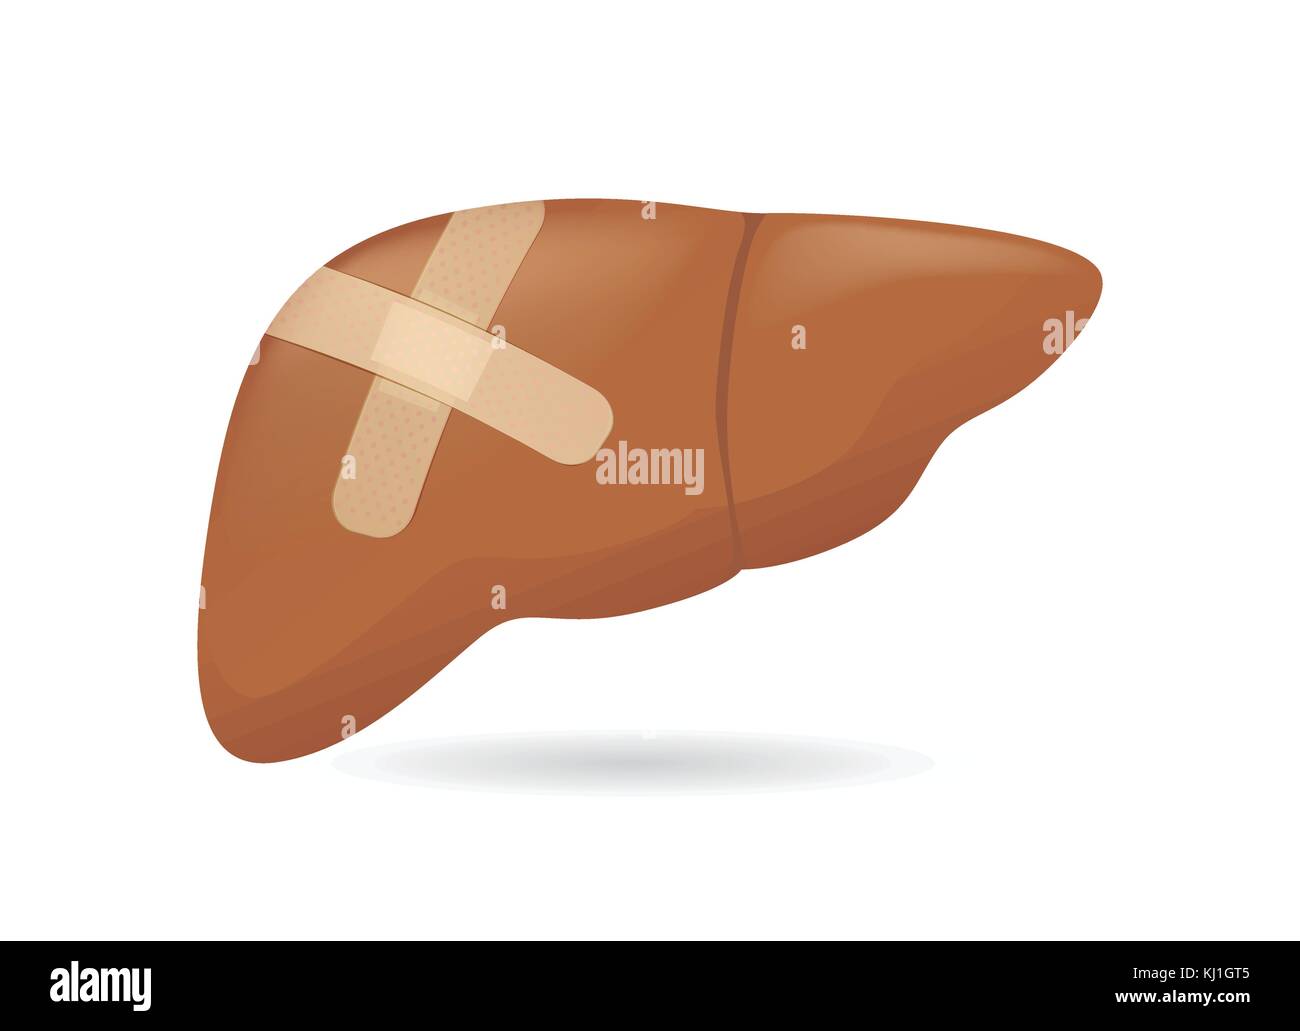 Human liver with first aid Bandages on isolated. Stock Vector